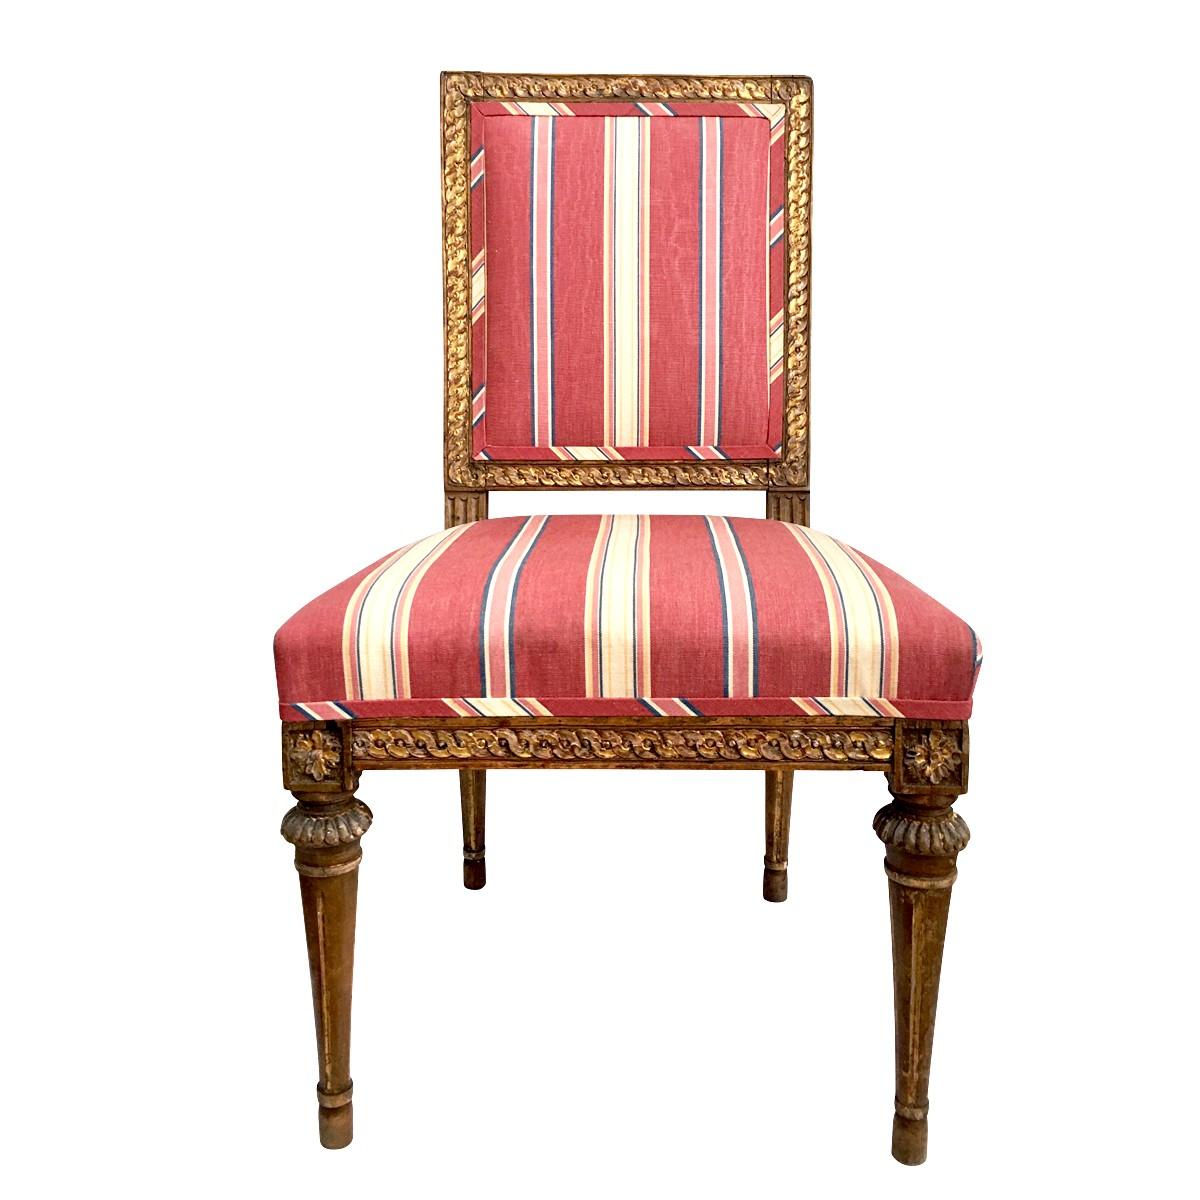 18th century North European Swedish stained birch wood and parcel-gilt accent side or desk chair by Joseph Ruste (Master in Stockholm Sweden 1772-1792). Wood engraved signature 